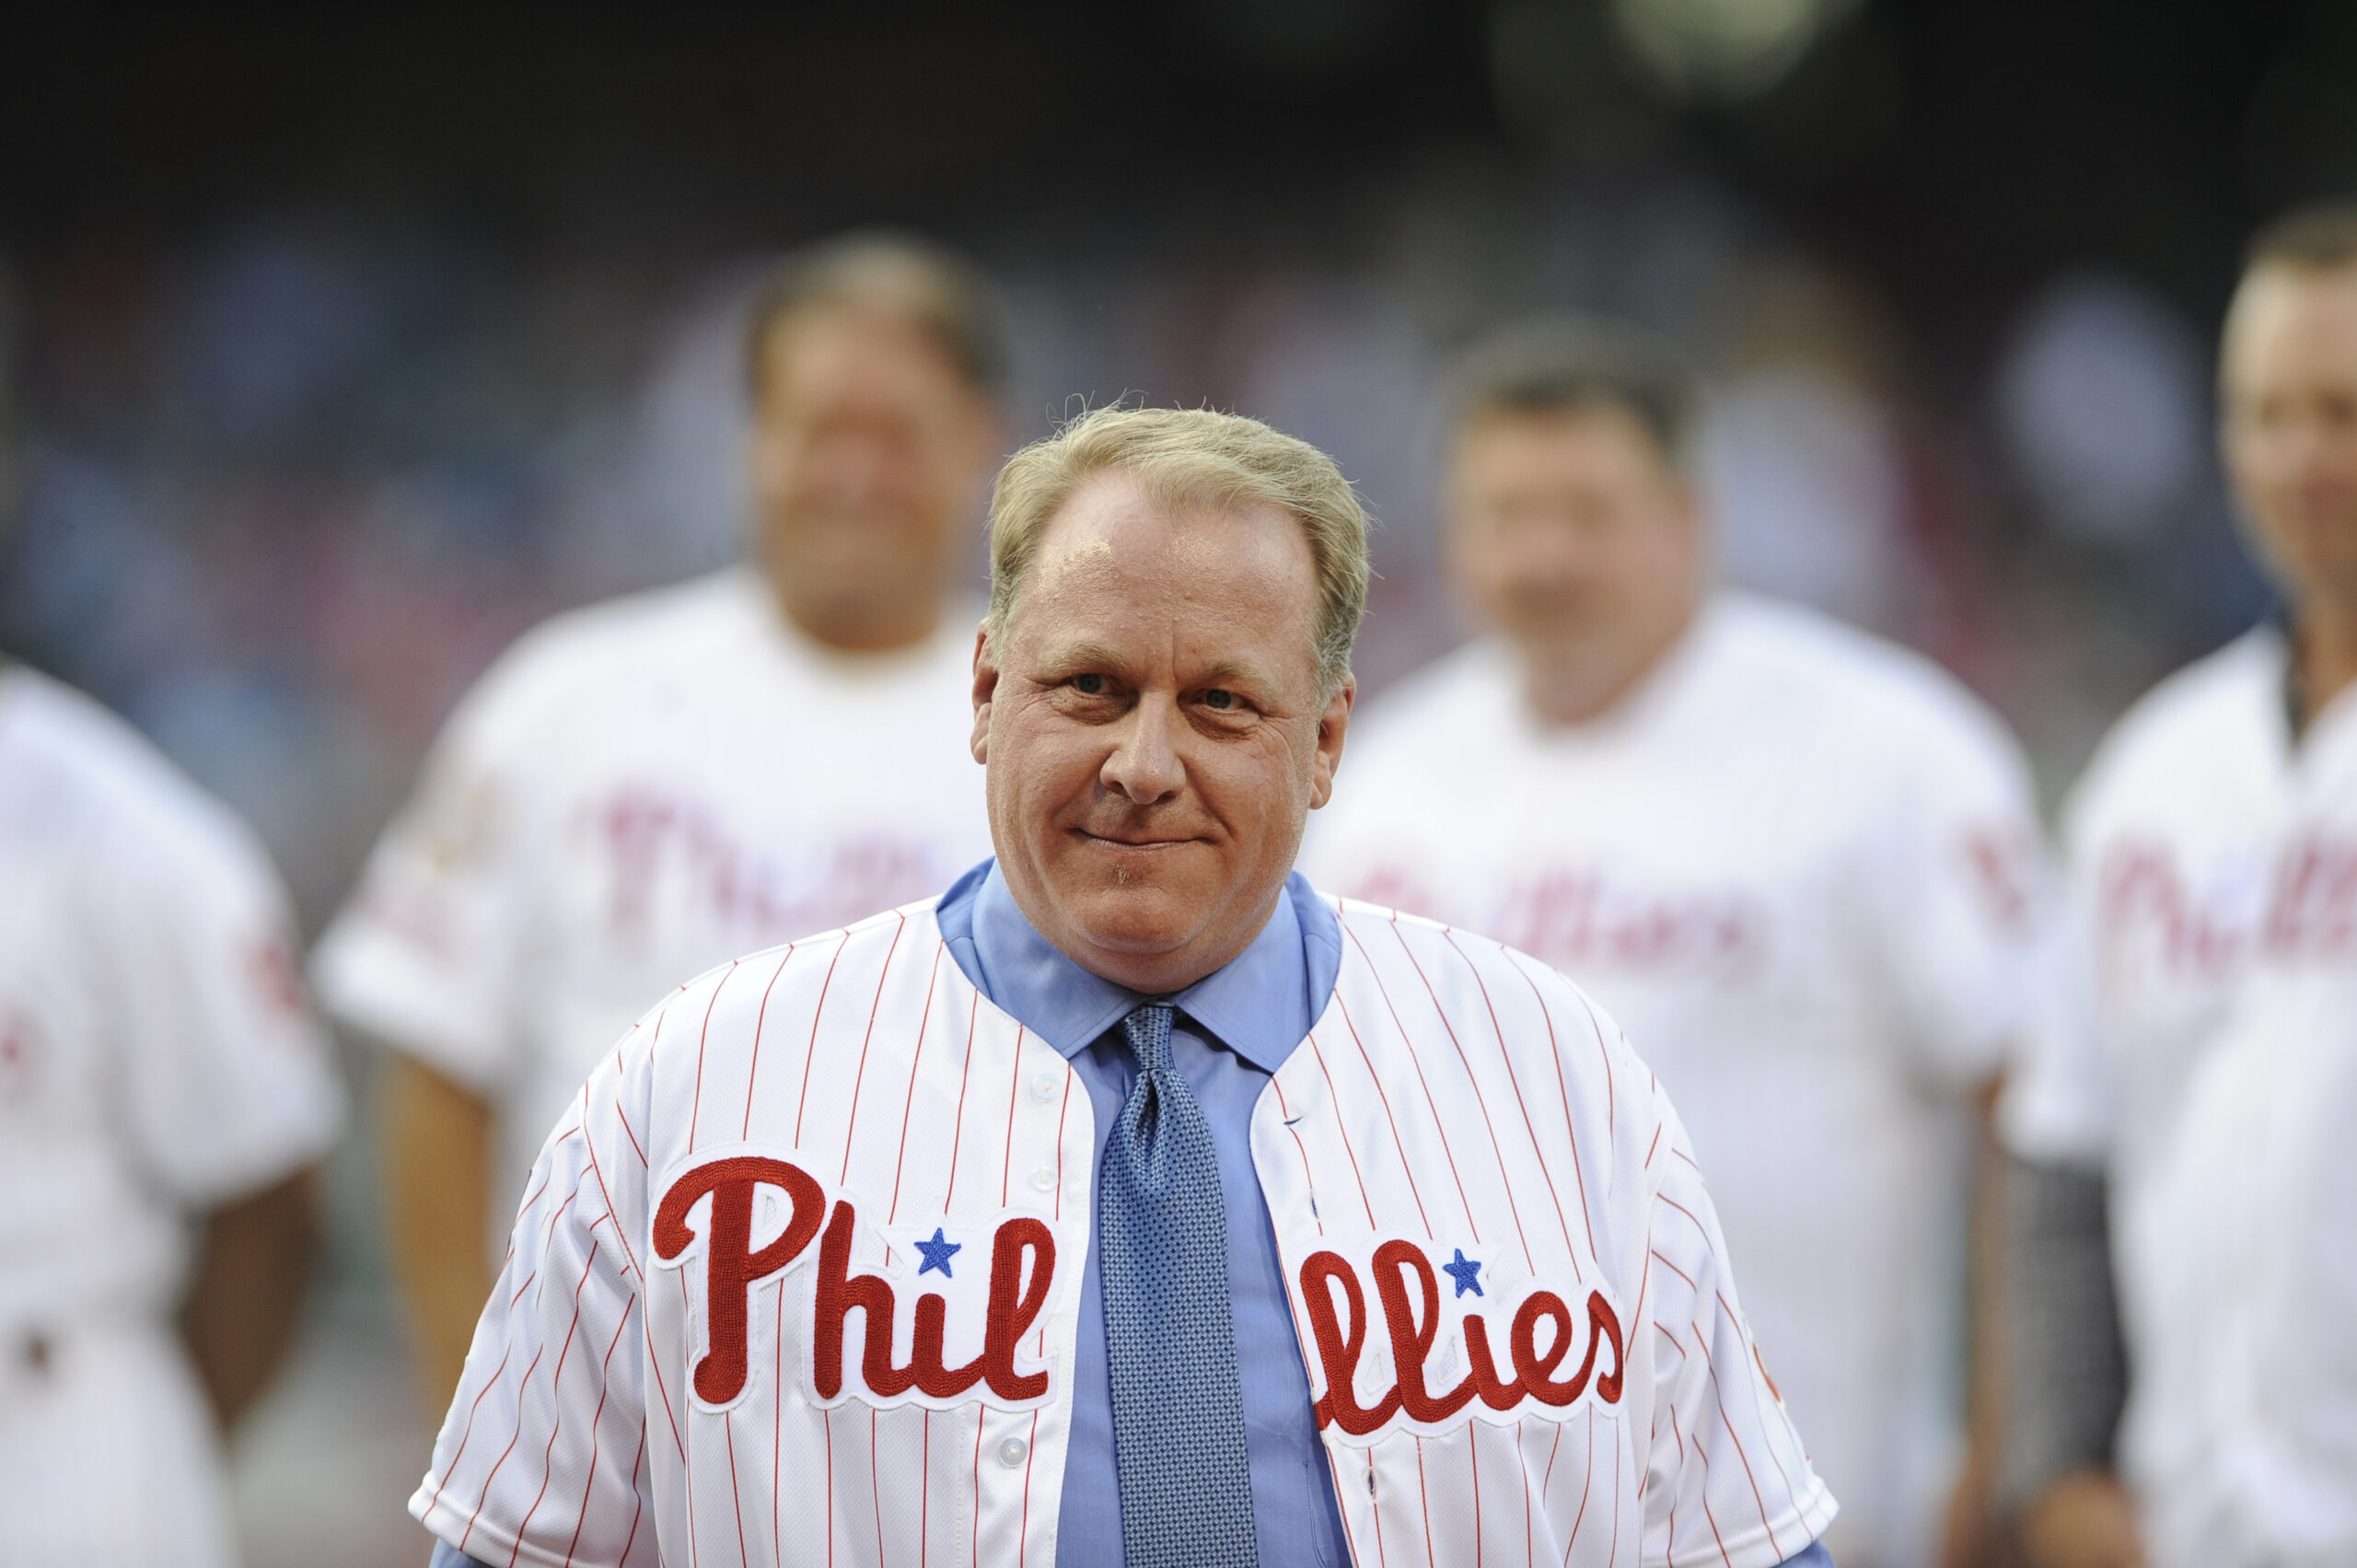 Curt Schilling Shares Post Claiming Jews Are 'Dominating' the Country